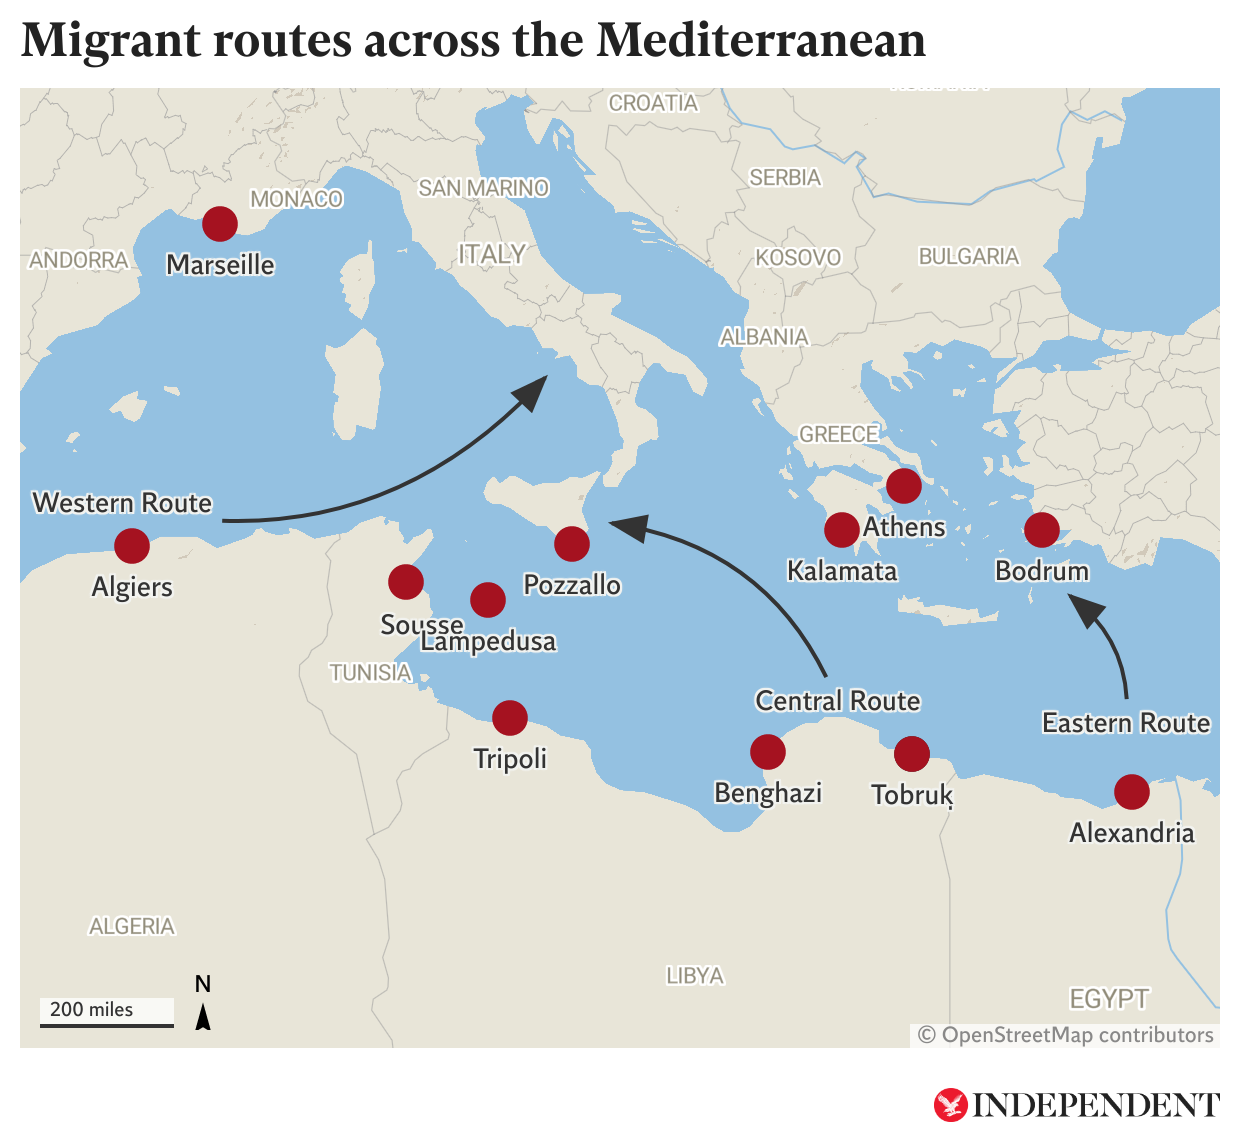 A map showing migrant routes across the Mediterranean